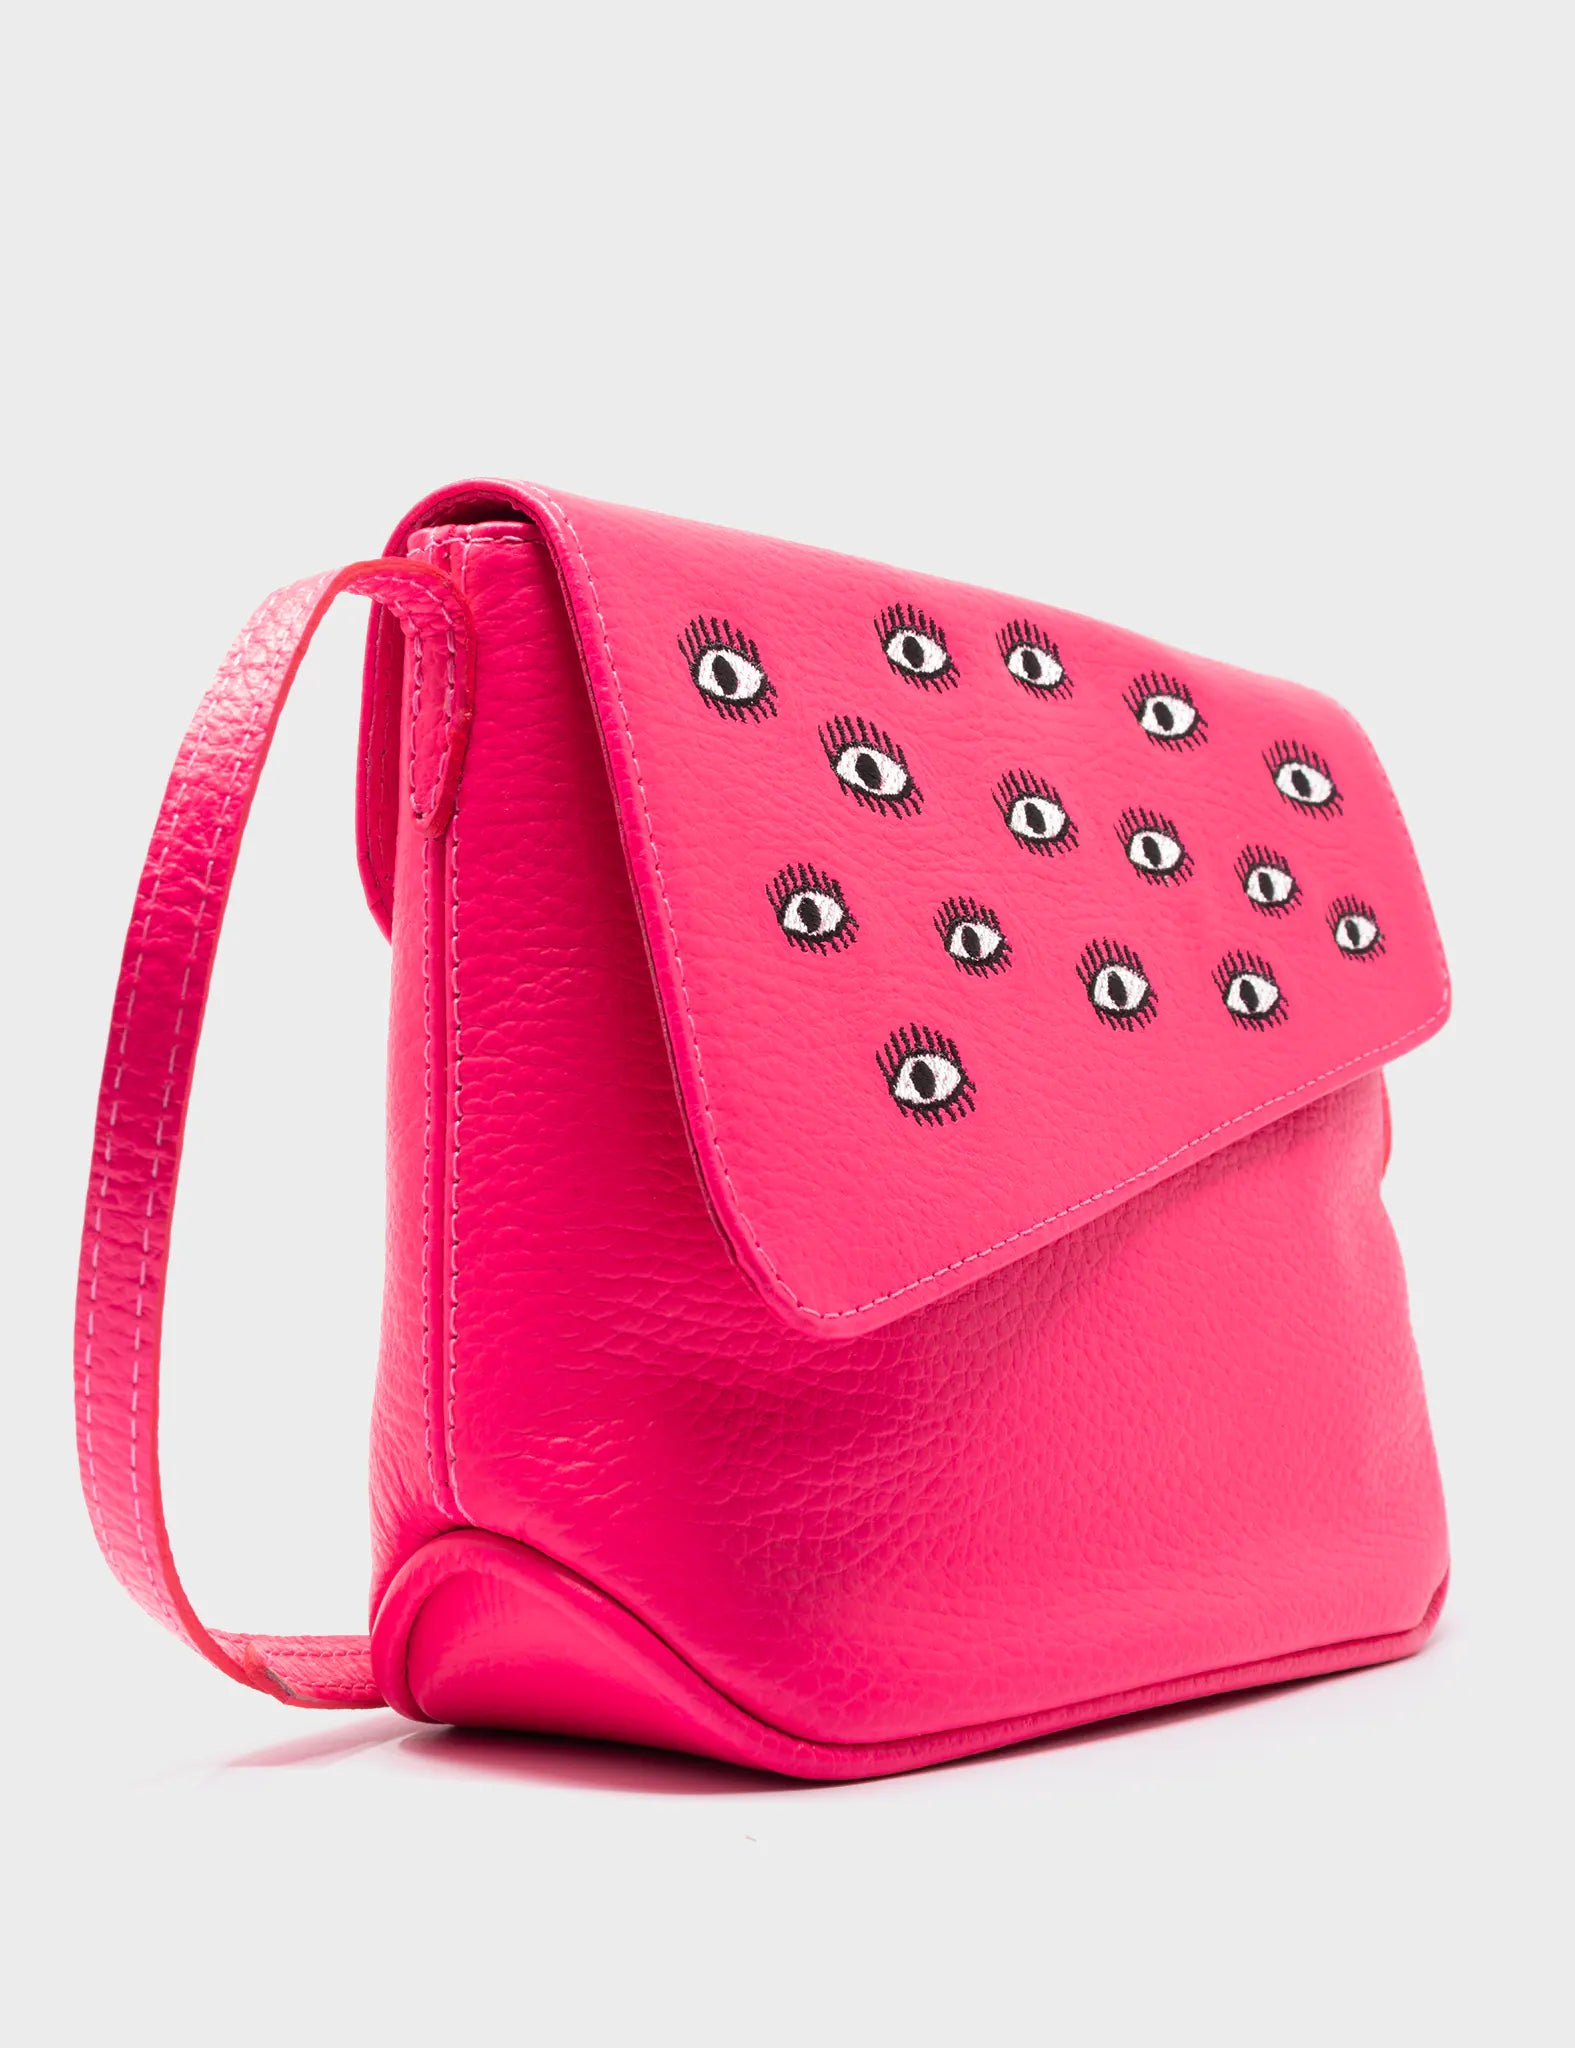 Bruno Mini Crossbody Neon Pink Leather Bag - All Over Eyes Embroidery - Side Corner View